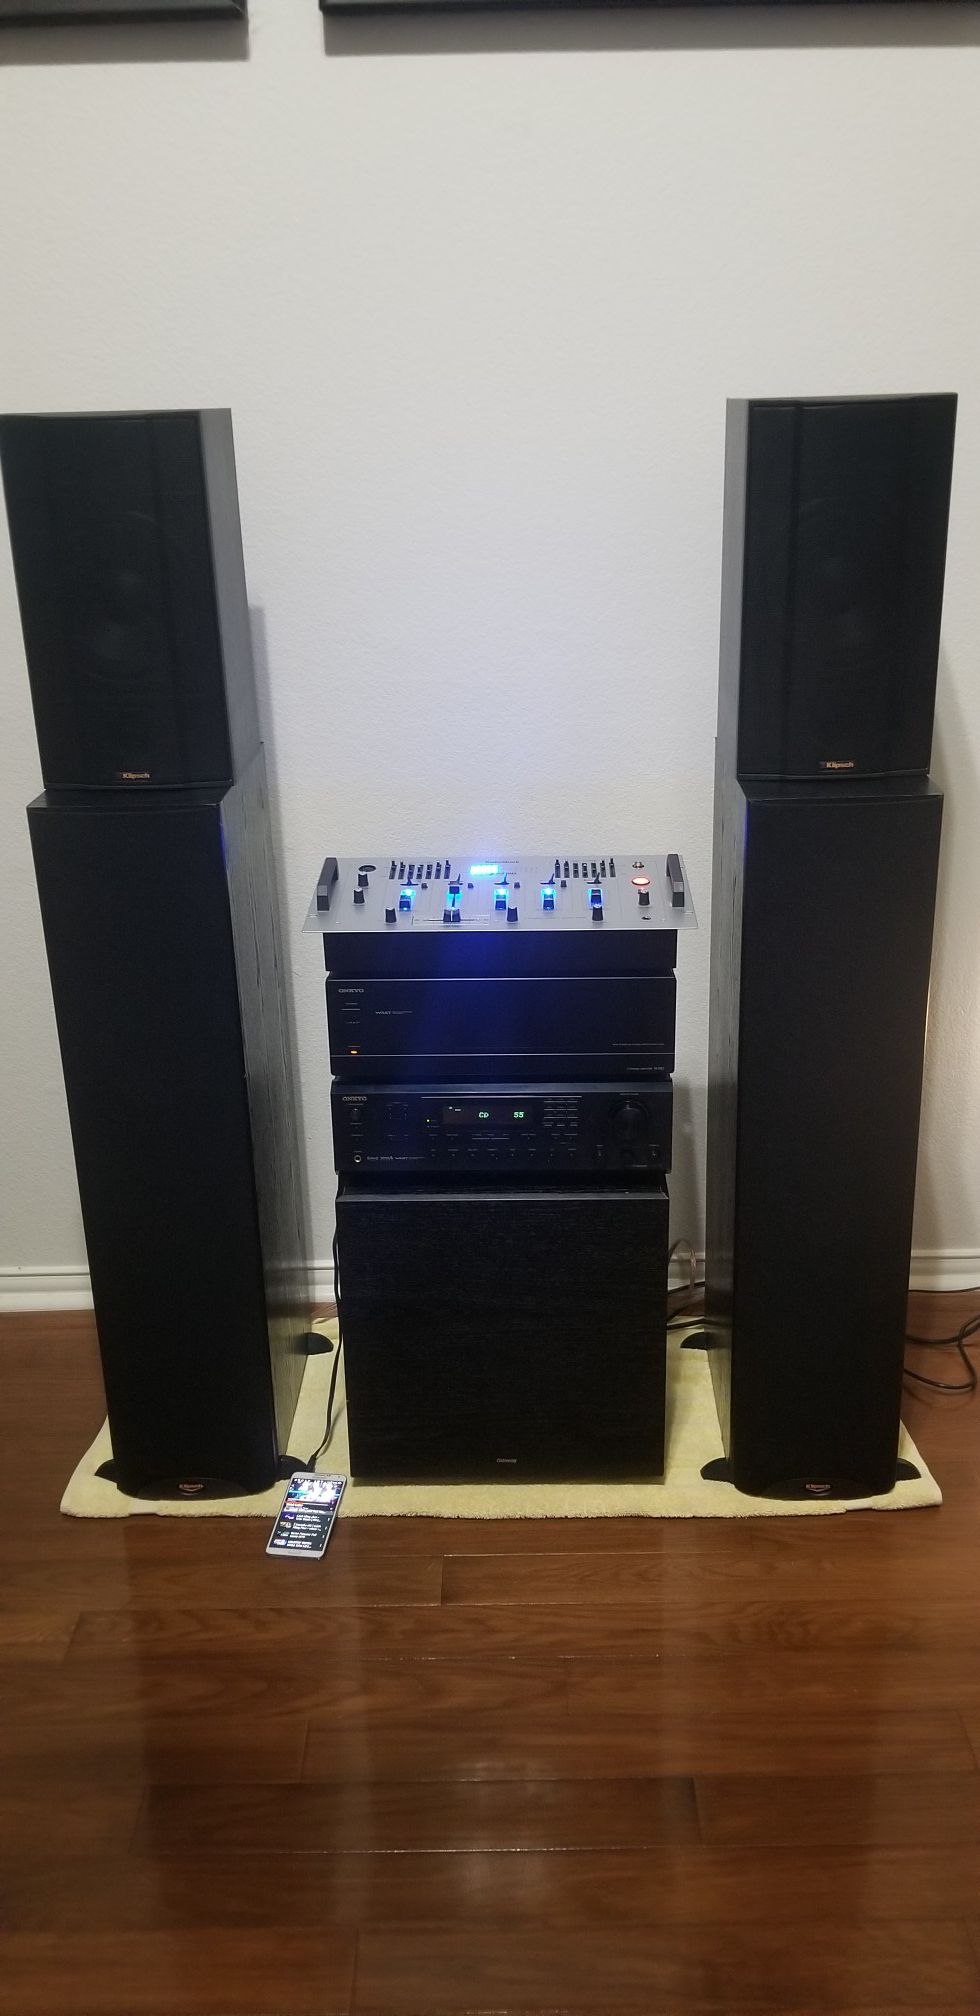 Home stereo system